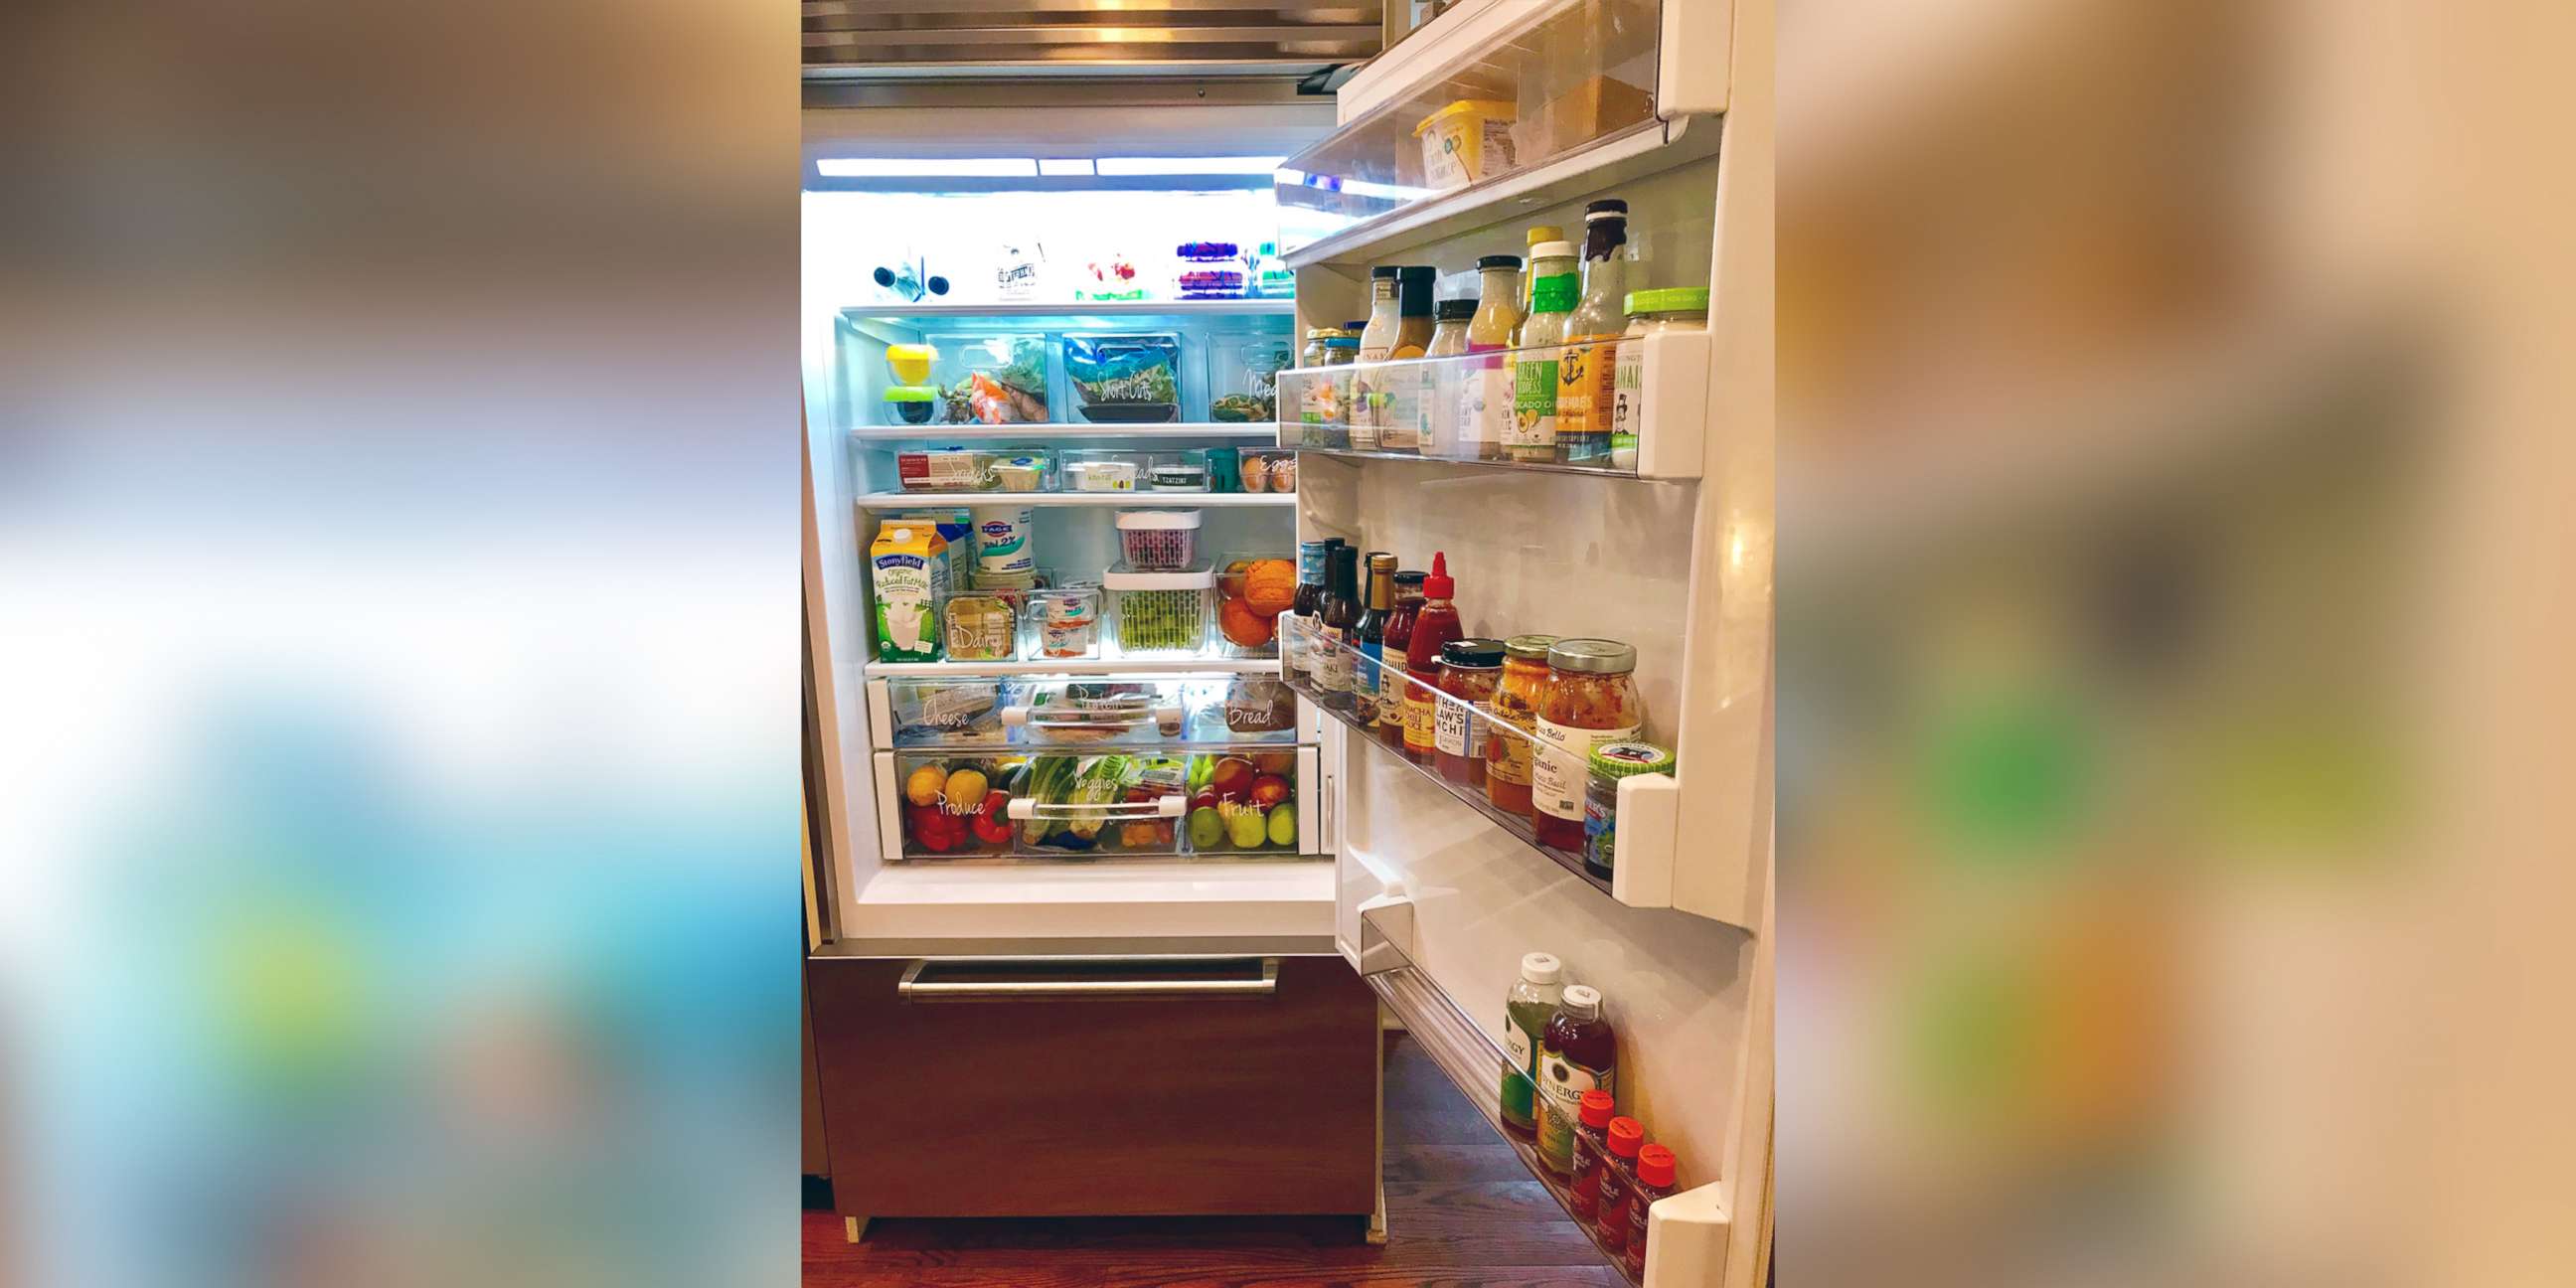 PHOTO: The Food Fix founder Heather Bauer shares her refrigerator organization tips.